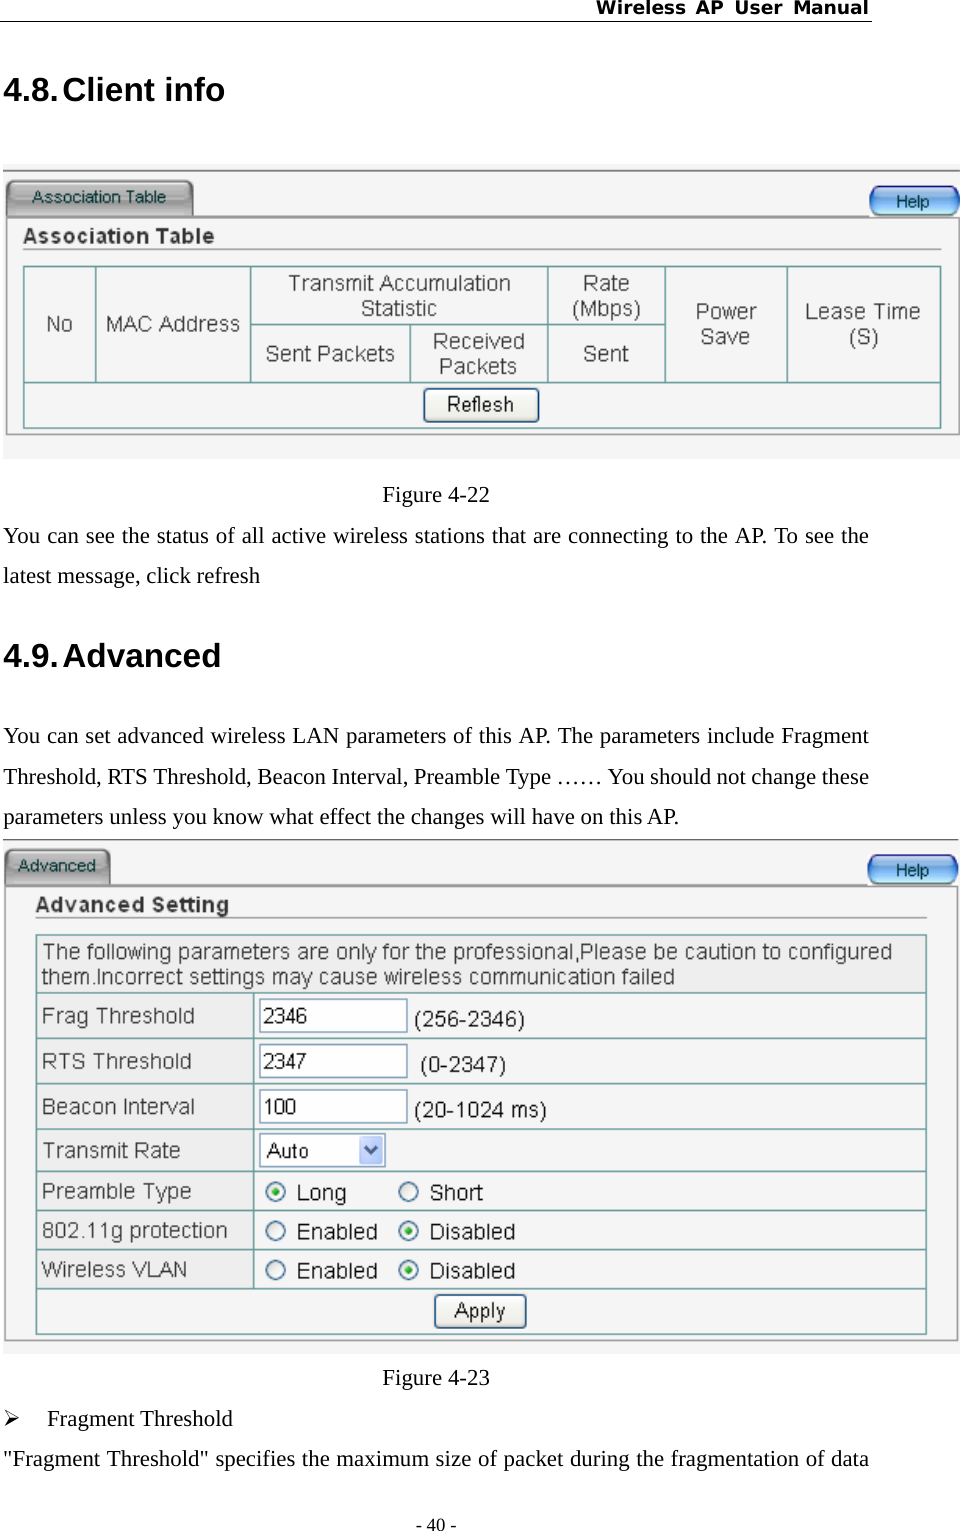 Wireless AP User Manual - 40 -  4.8. Client  info  Figure 4-22 You can see the status of all active wireless stations that are connecting to the AP. To see the latest message, click refresh 4.9. Advanced You can set advanced wireless LAN parameters of this AP. The parameters include Fragment Threshold, RTS Threshold, Beacon Interval, Preamble Type …… You should not change these parameters unless you know what effect the changes will have on this AP.  Figure 4-23 ¾ Fragment Threshold &quot;Fragment Threshold&quot; specifies the maximum size of packet during the fragmentation of data 